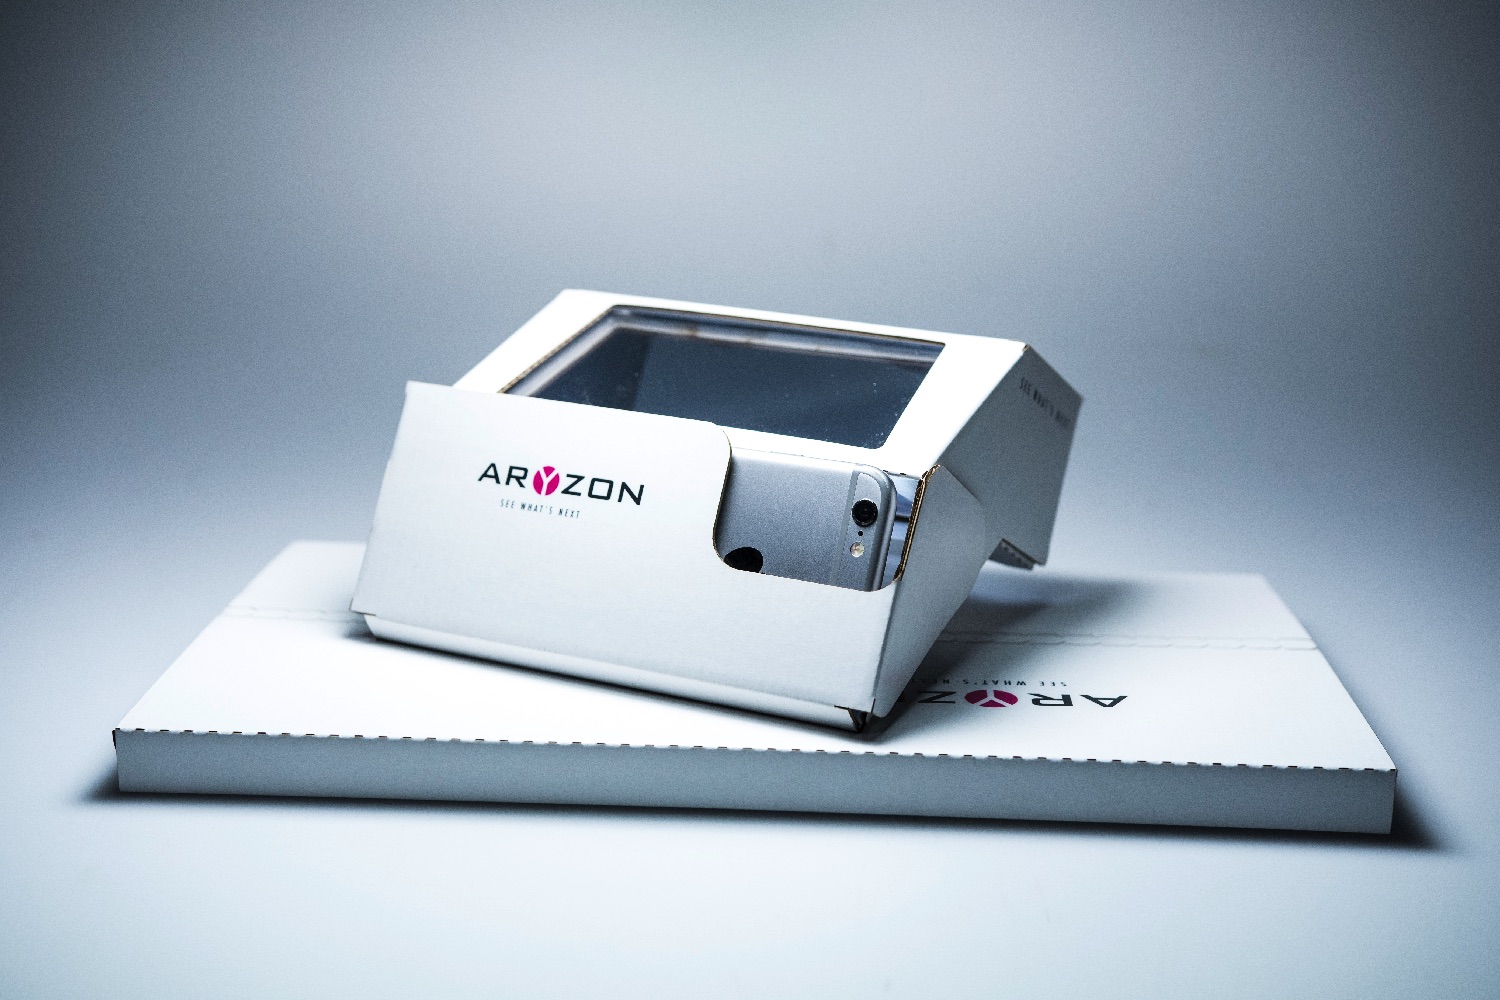 aryzon augmented reality kickstarter the package